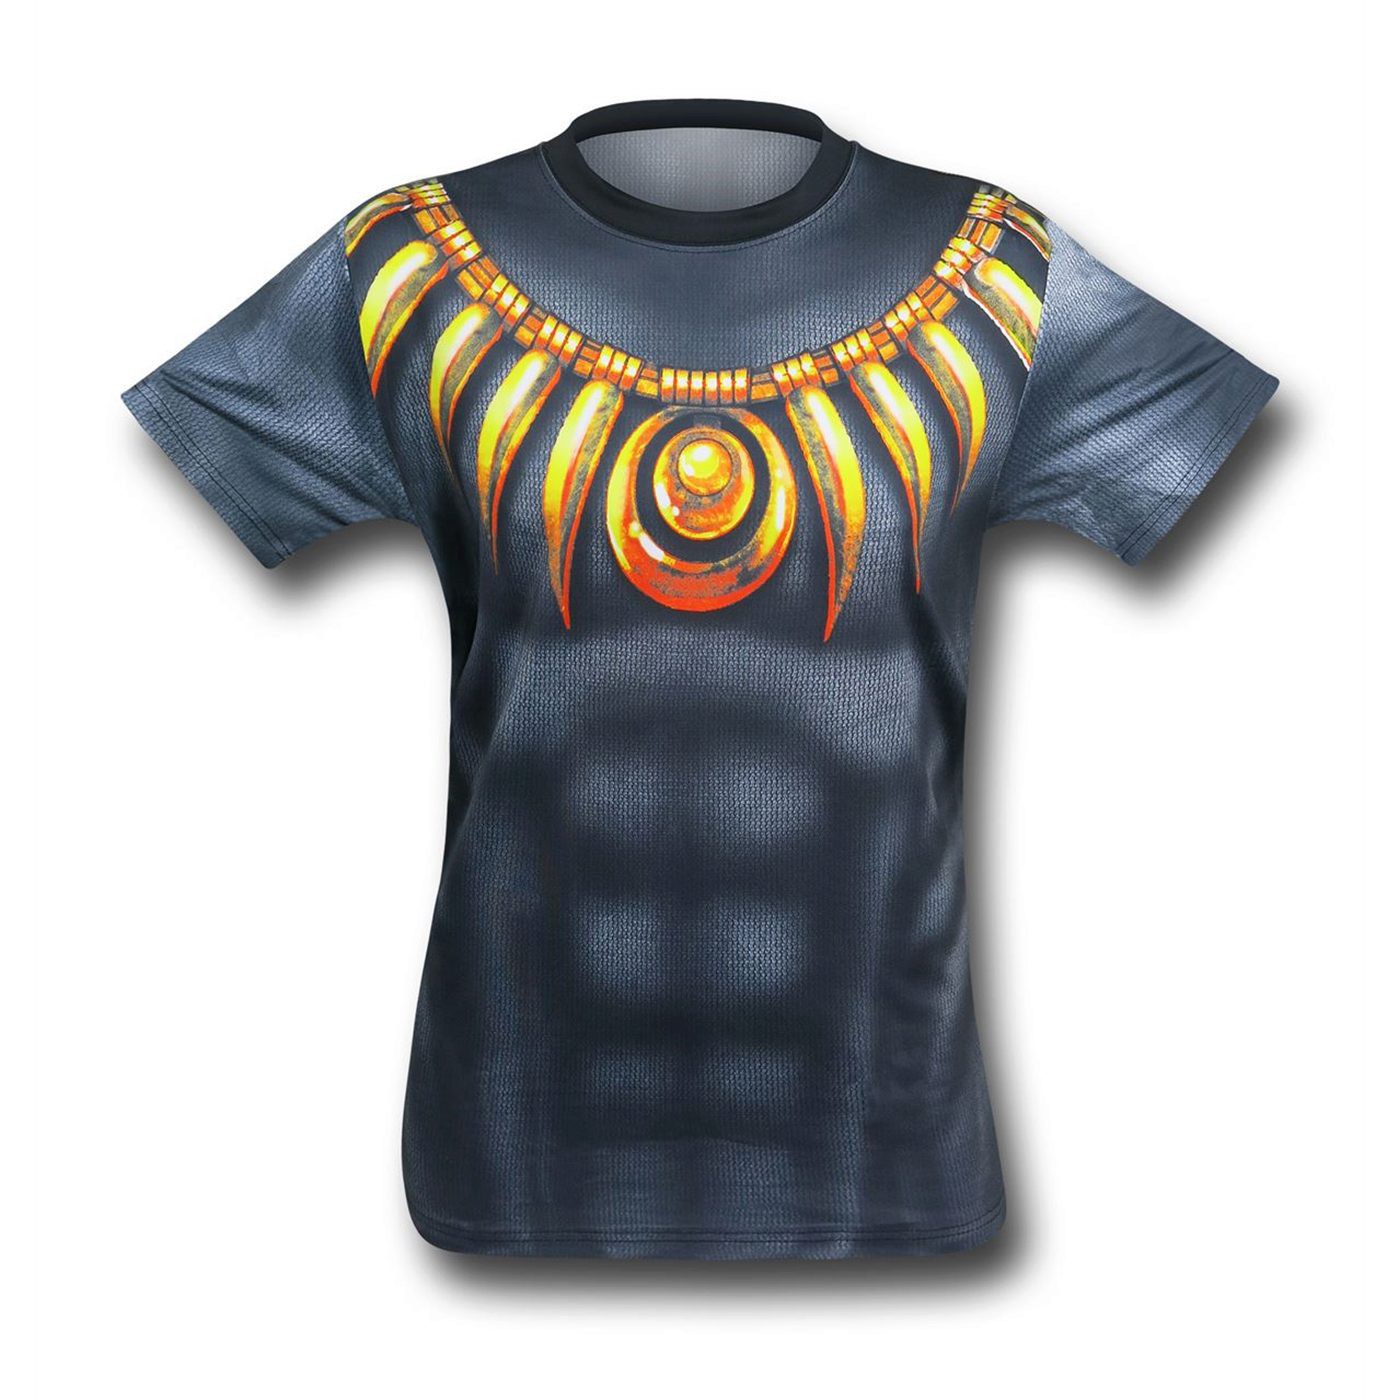 Black Panther Sublimated Costume Men's Fitness T-Shirt